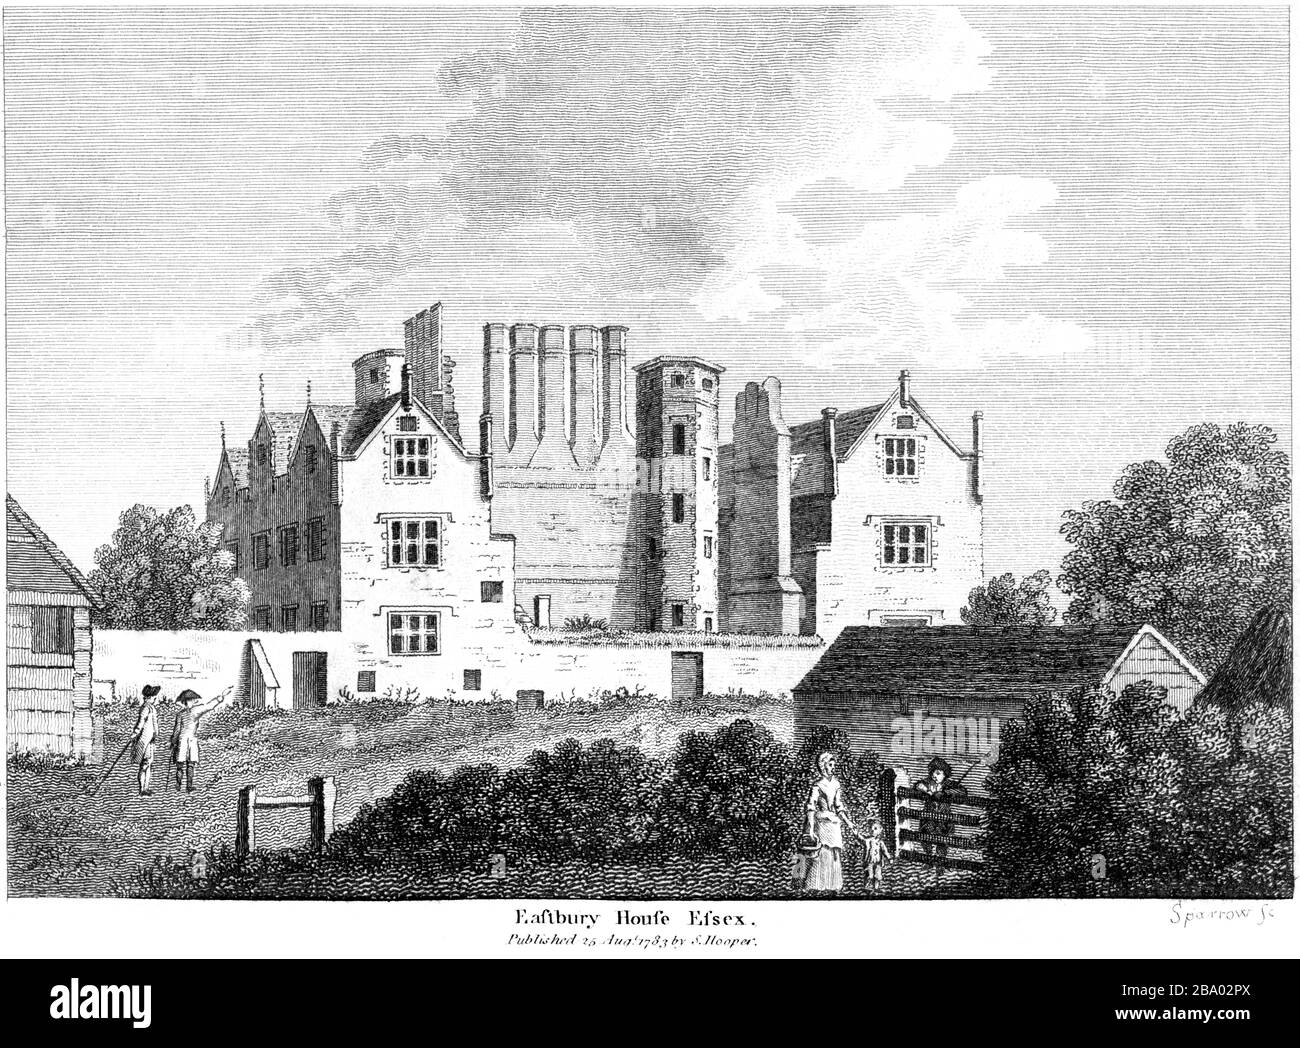 An engraving of Eastbury House (Eastbury Manor House) Essex 1783 scanned at high res from a book published around 1786. Believed copyright free. Stock Photo